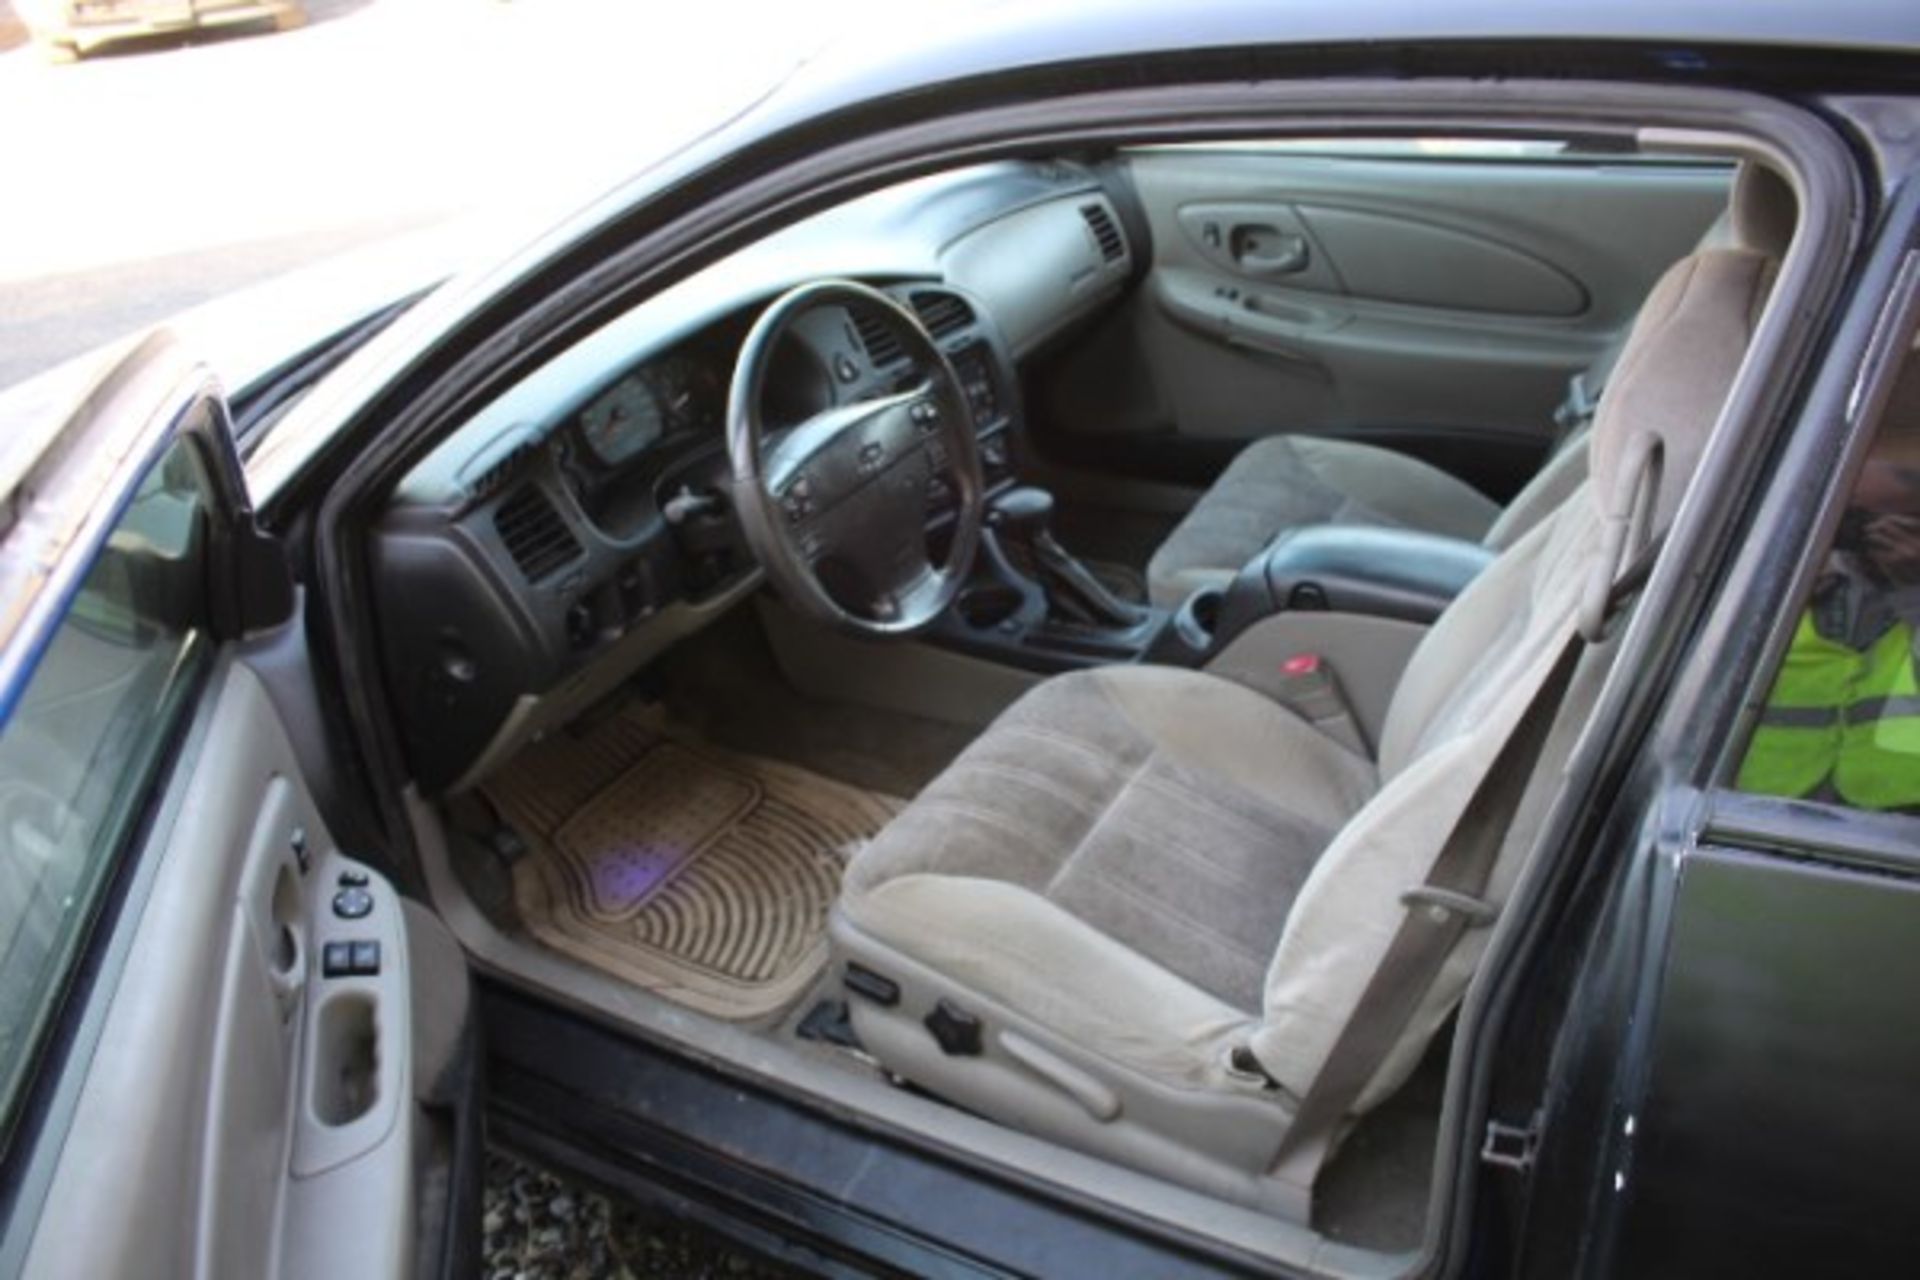 2001 Monte Carlo SS - Image 6 of 6